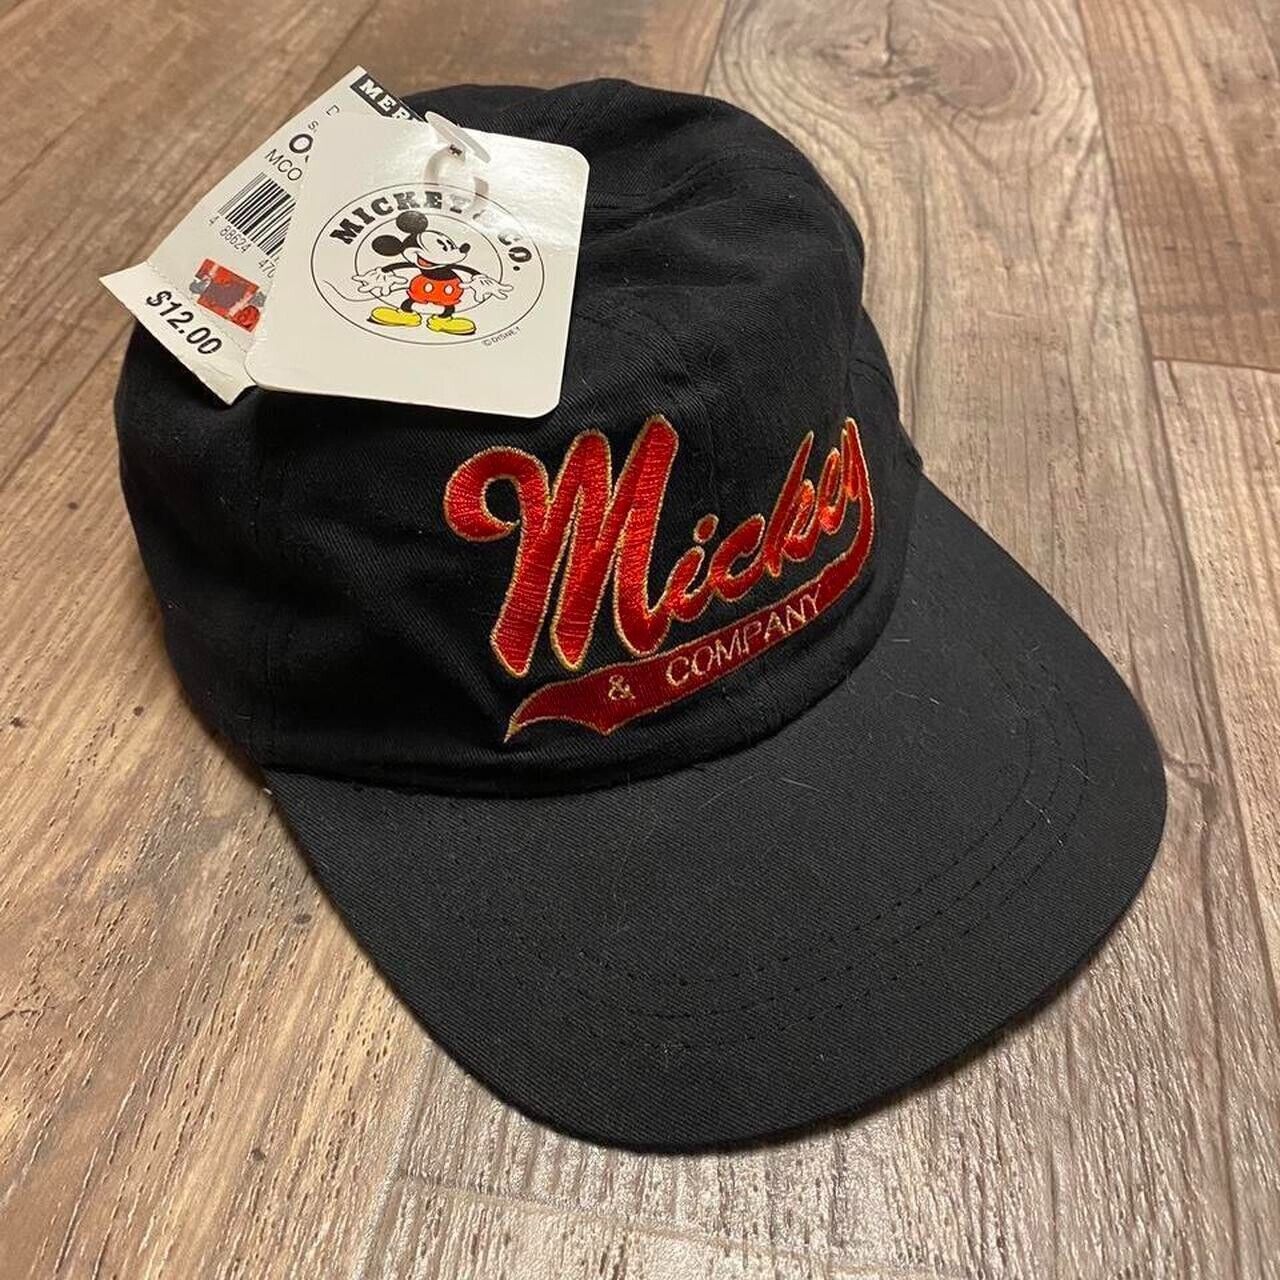 Vintage 90s Mickey and Company hat